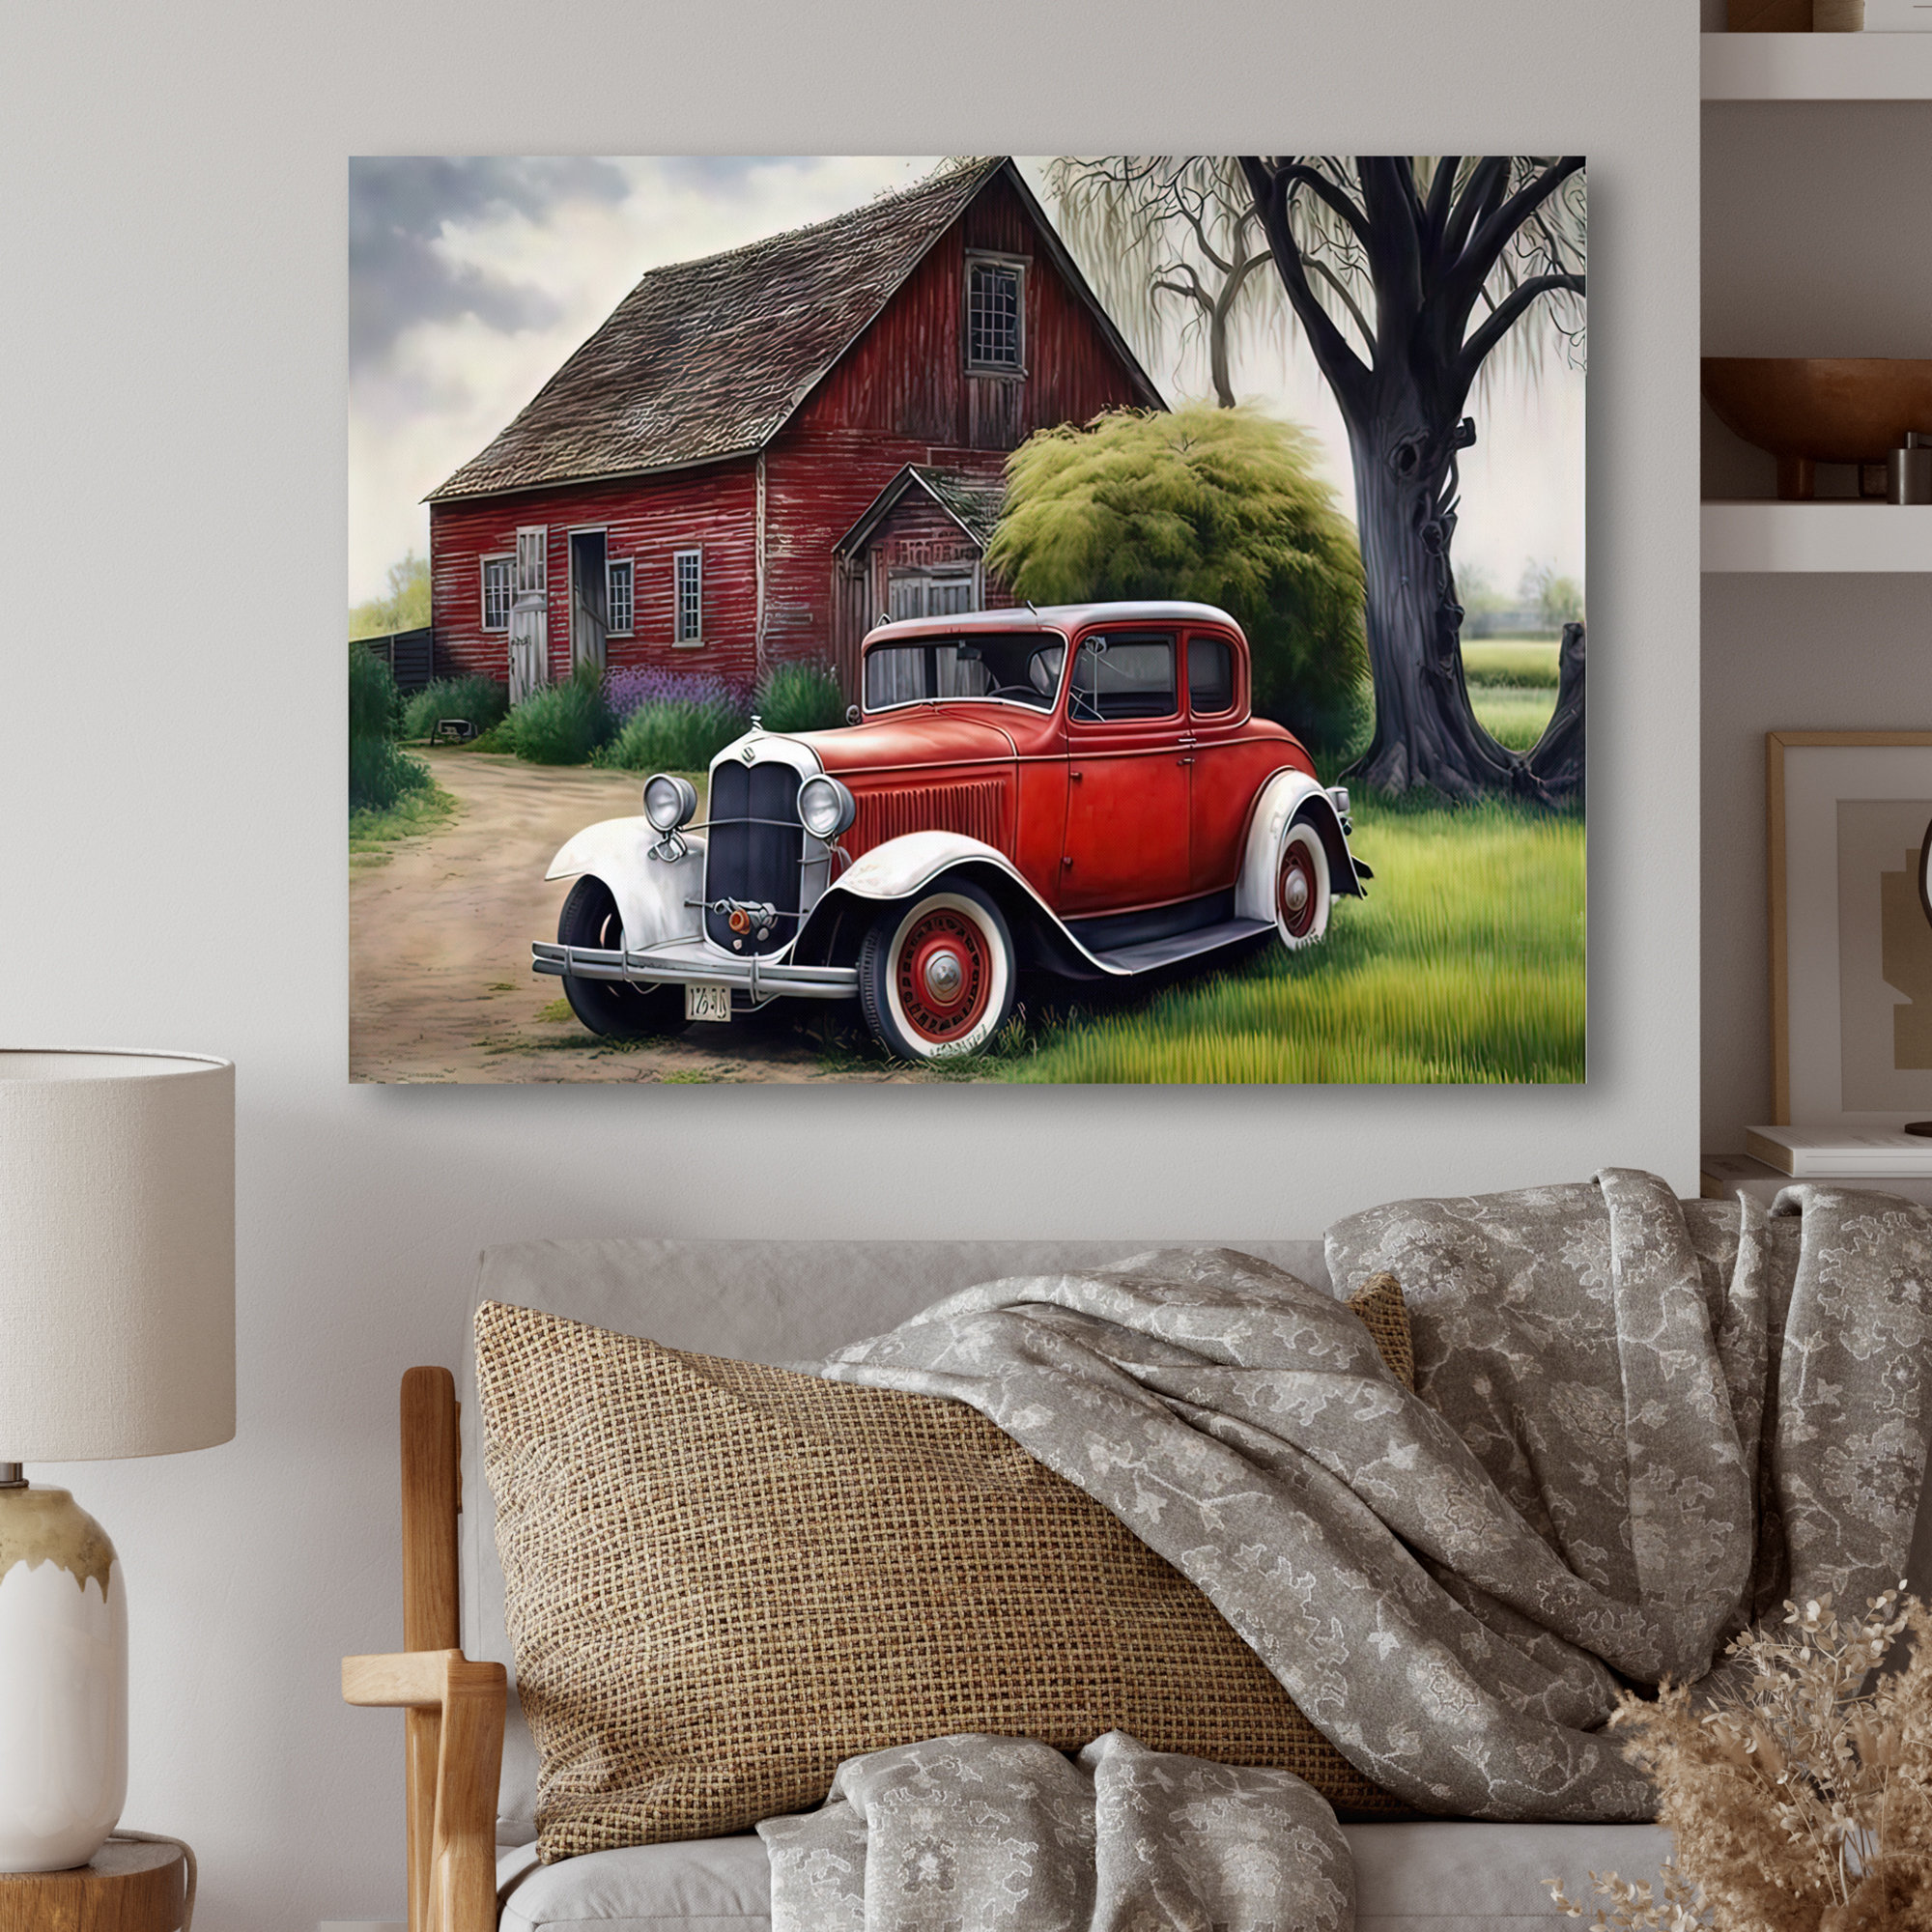 17 Stories Old Vintage Car At The Barn On Canvas Painting Wayfair